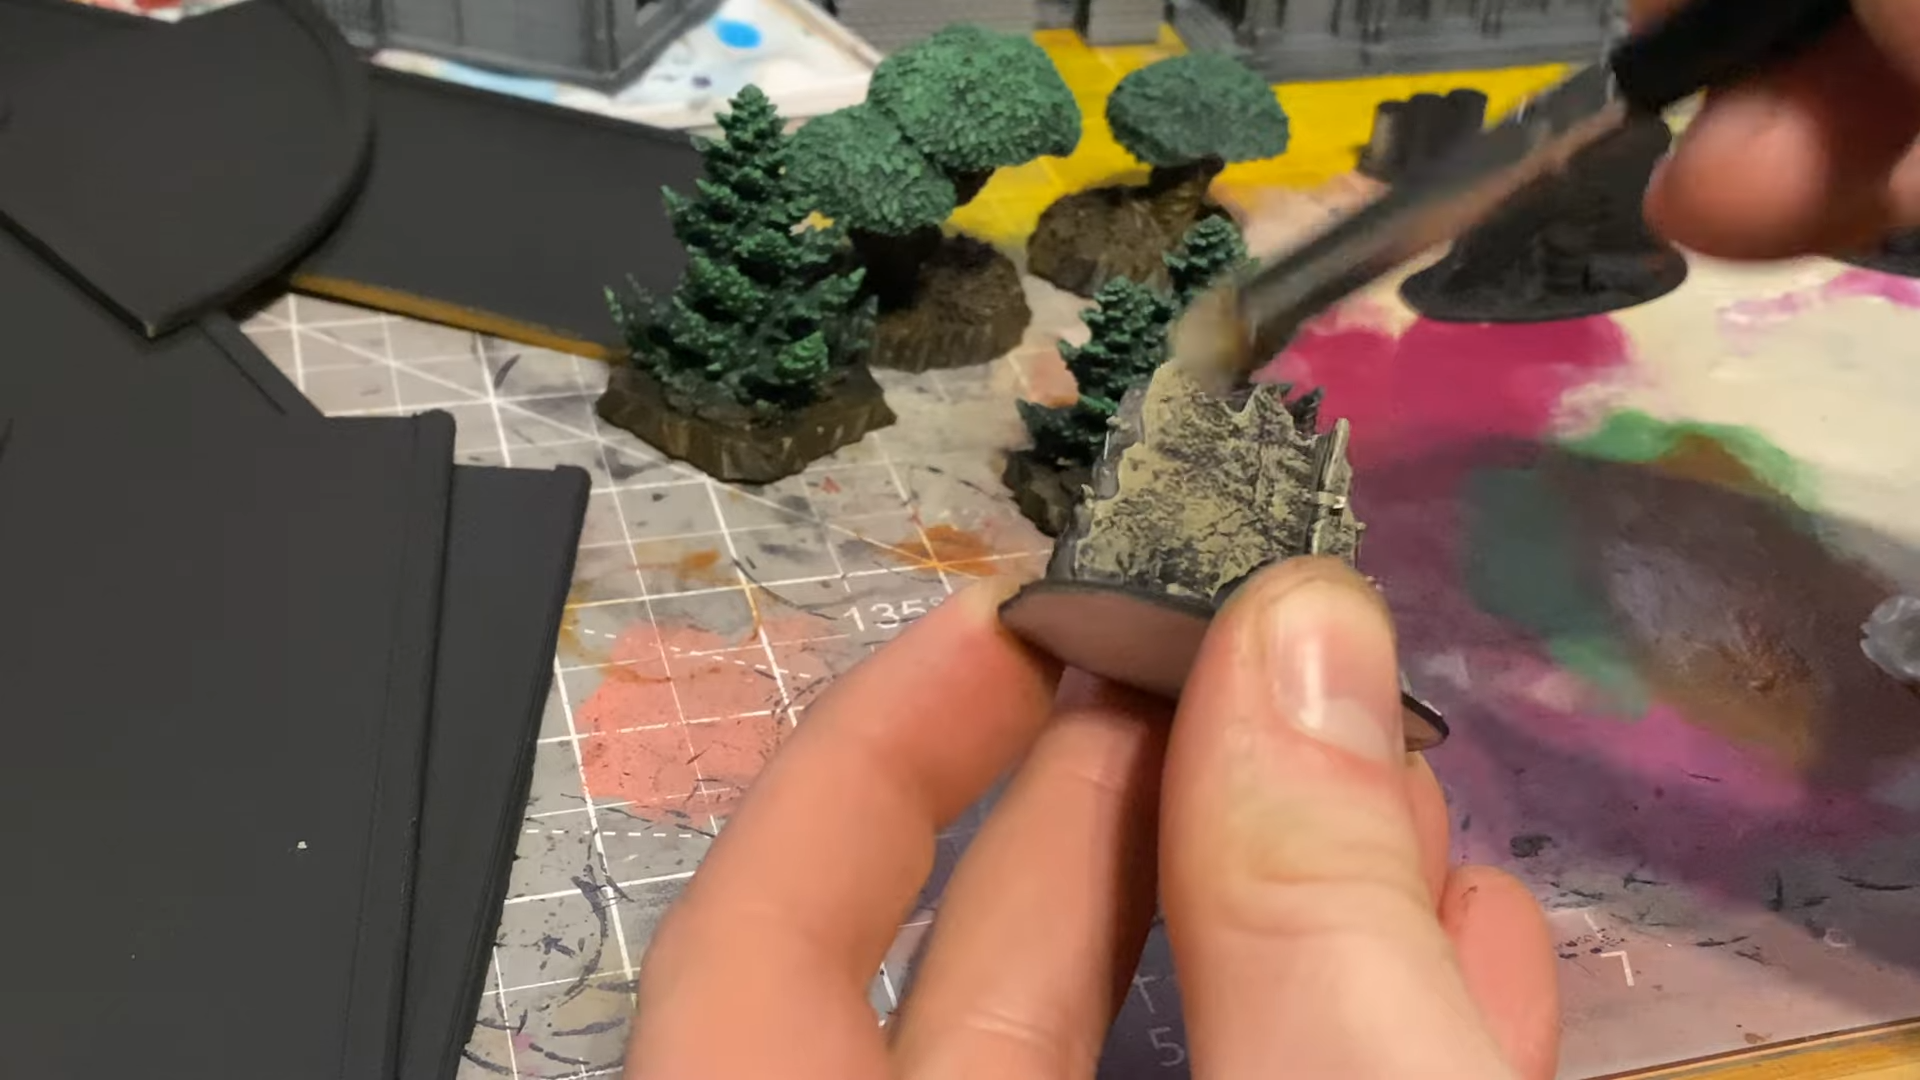 Painting trees, rocks, and terrains